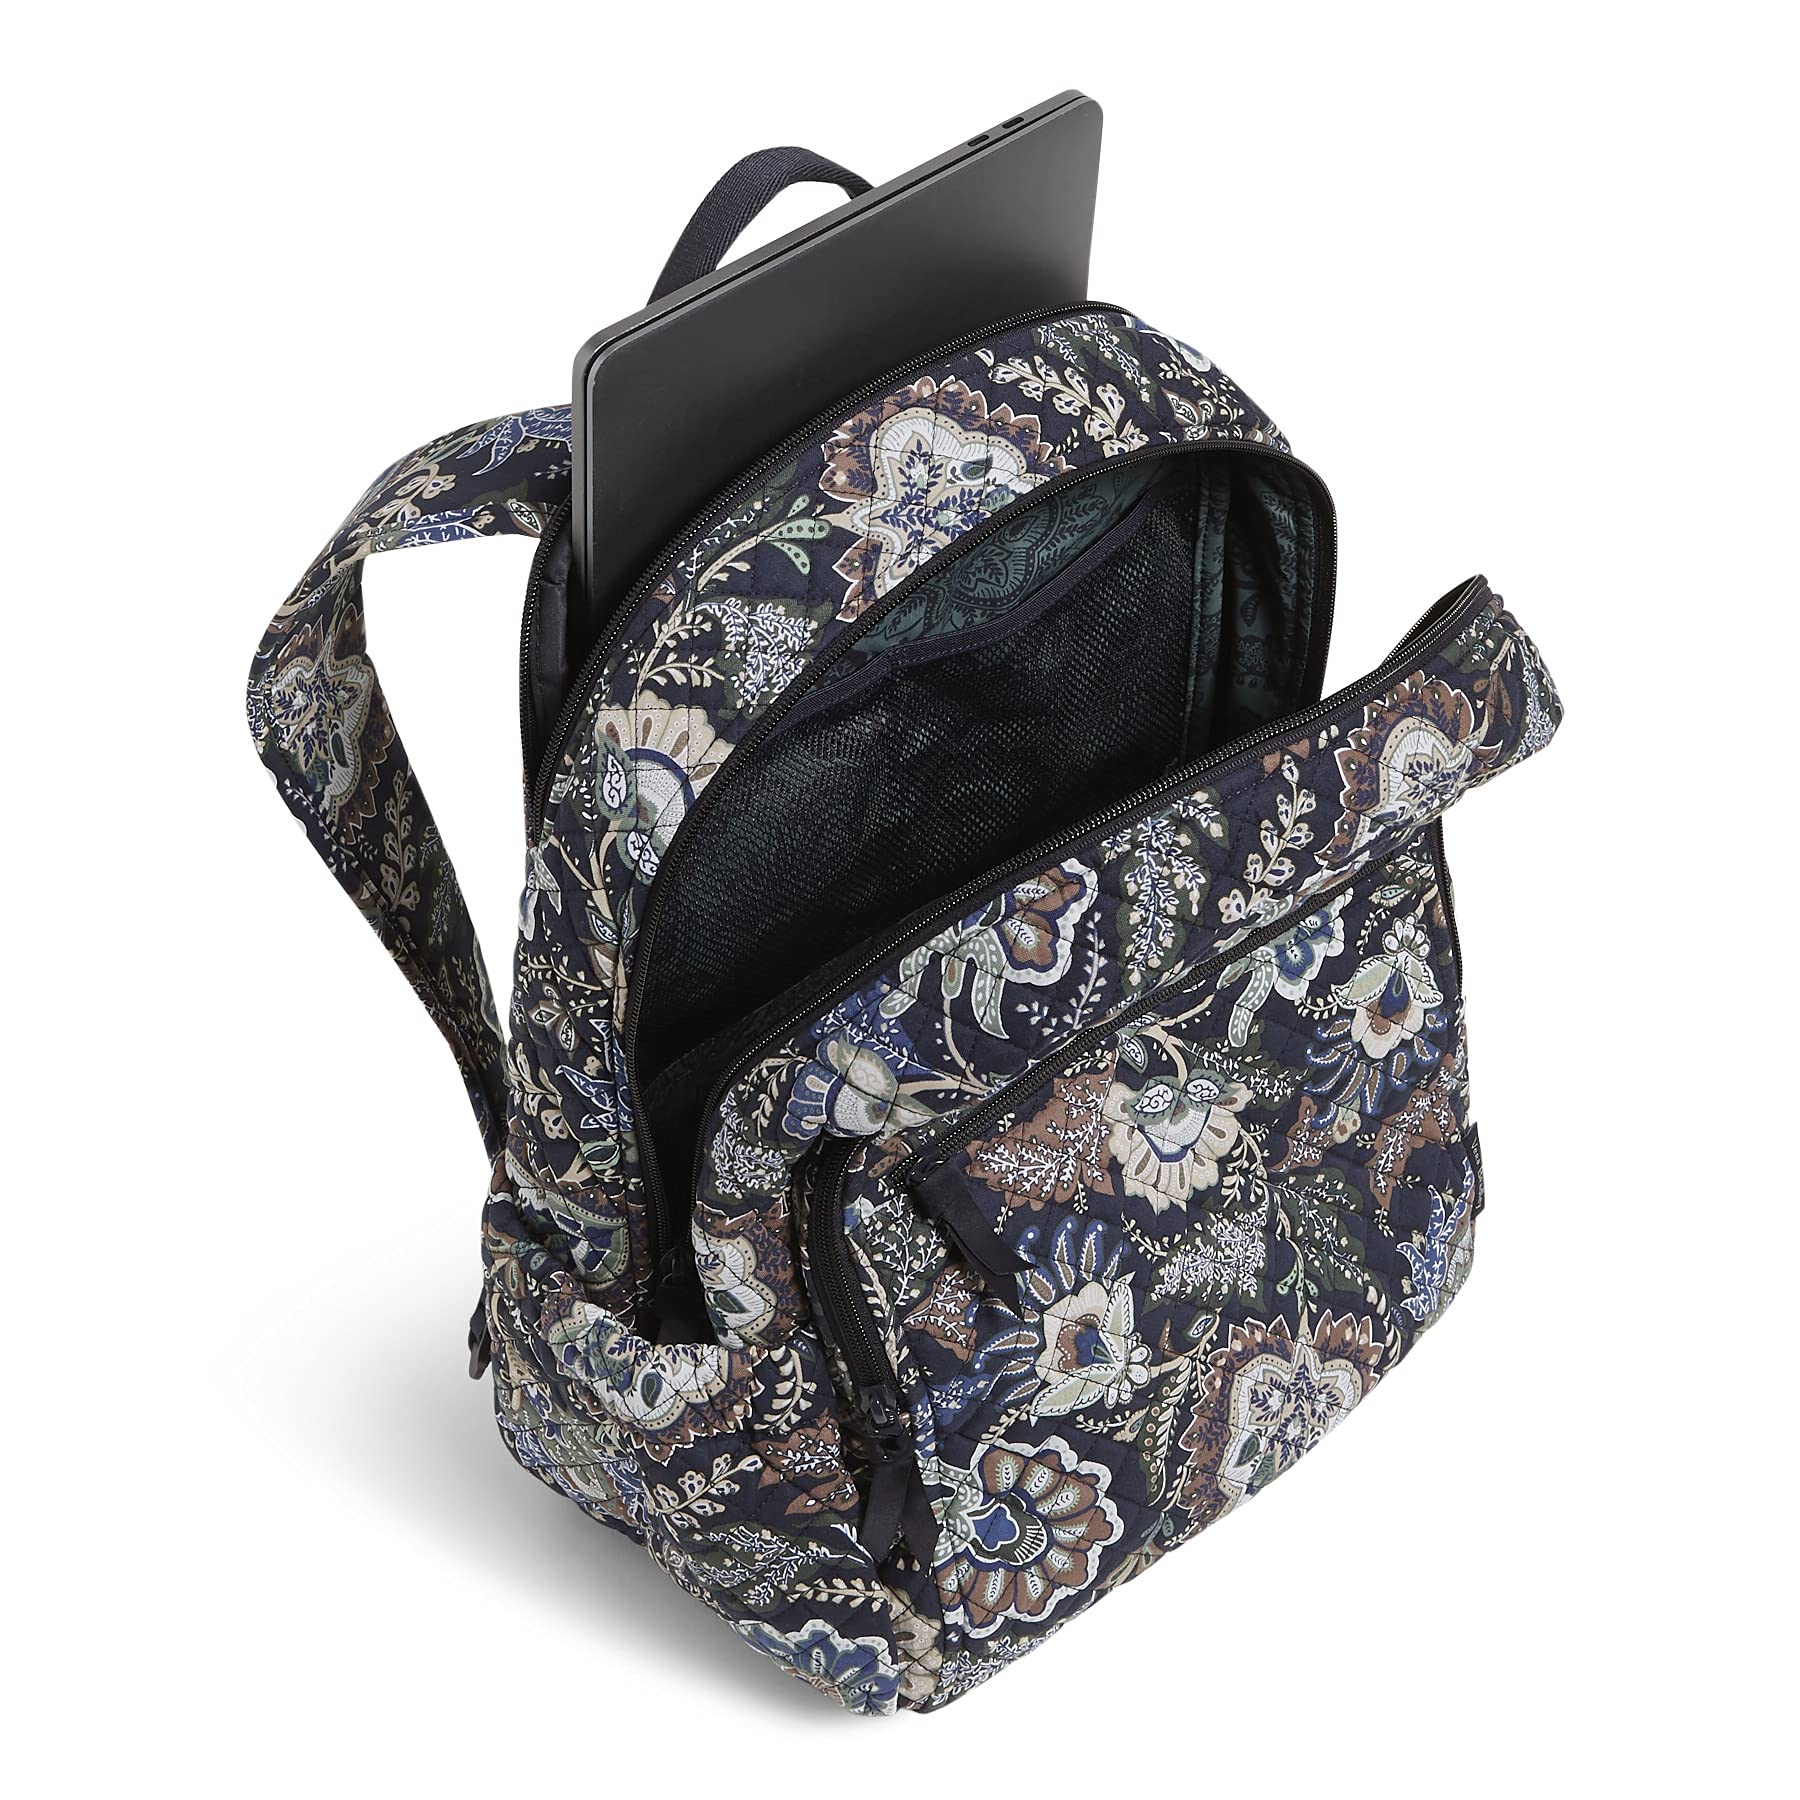 Vera Bradley Women's Cotton Campus Backpack, Java Navy Camo - Recycled Cotton, One Size